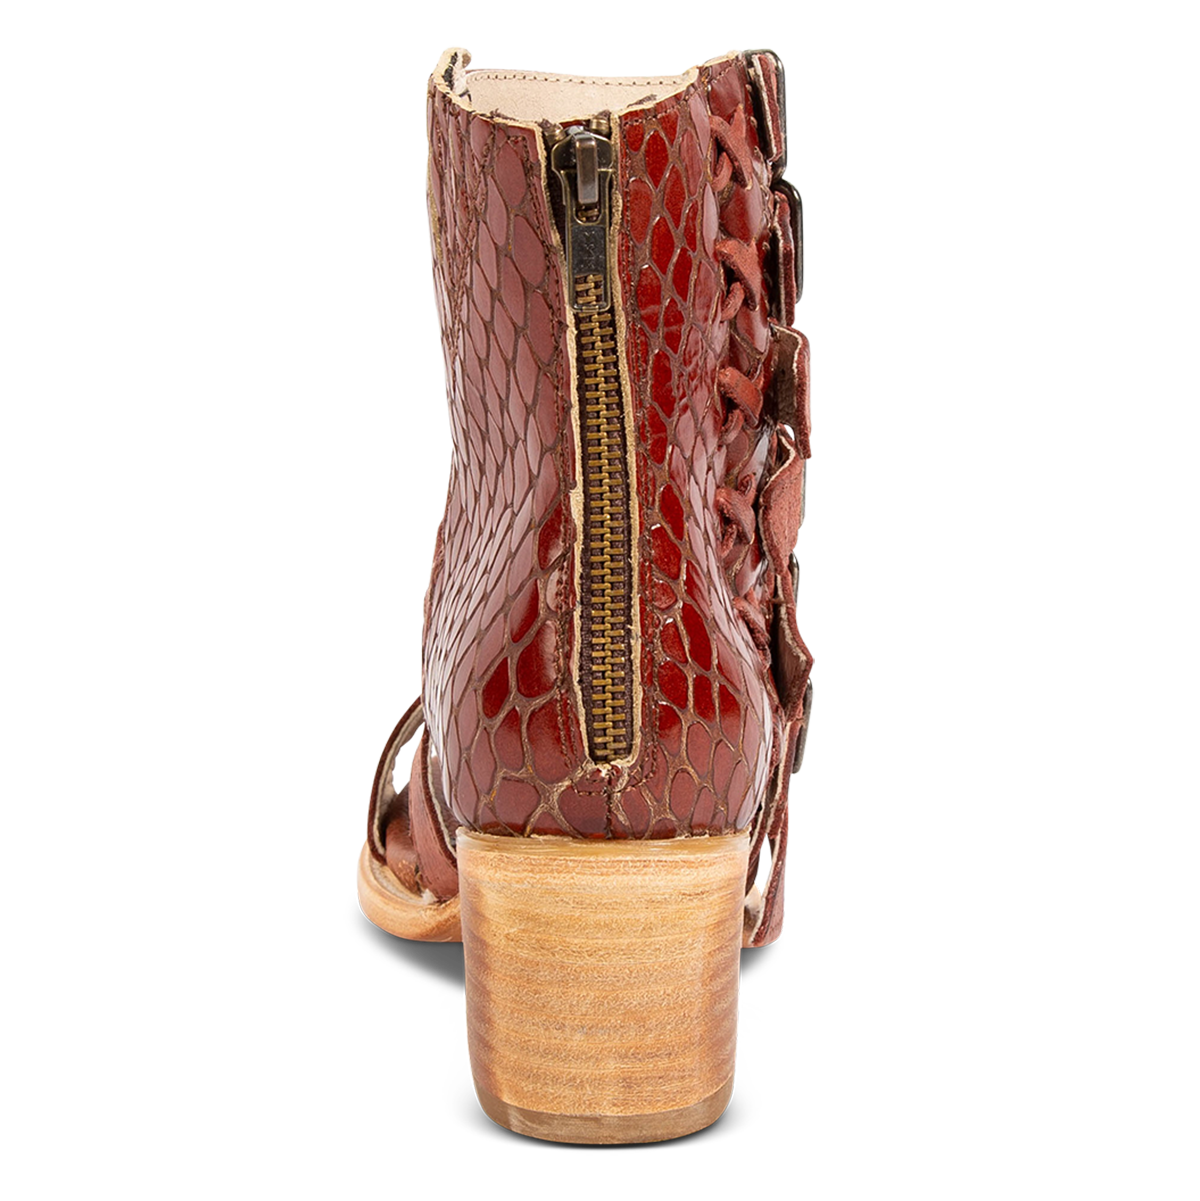 Back view showing a stacked heel and a working brass zipper on FREEBIRD women's Country rust snake multi embossed leather sandal